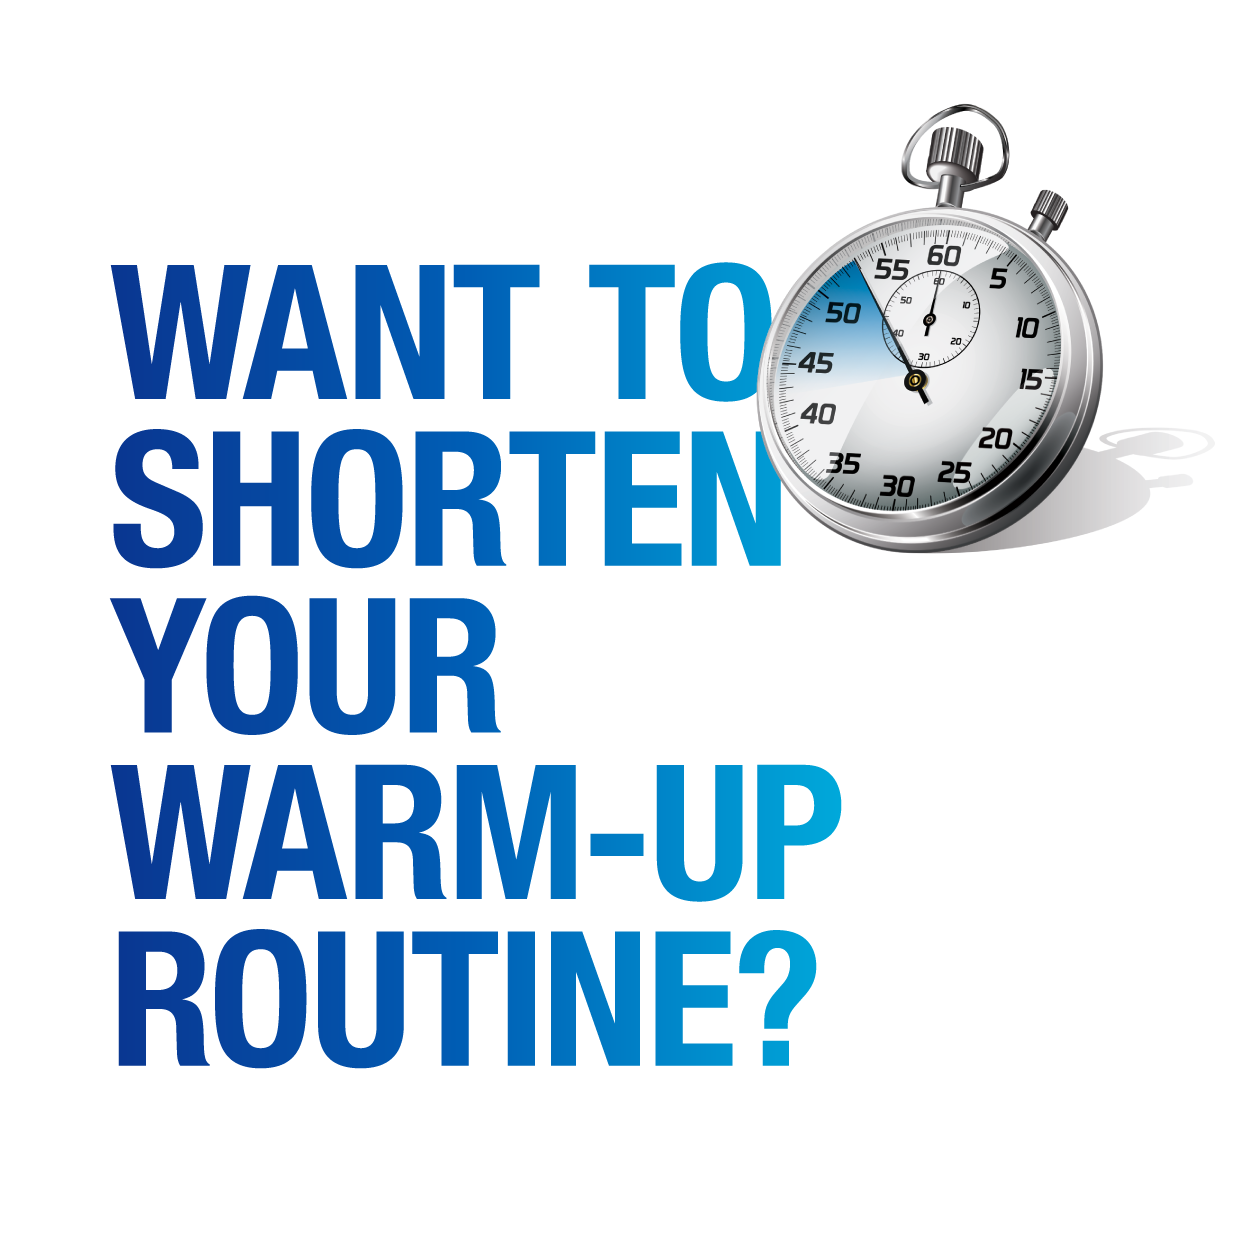 Want to shorten your warm-up routine?